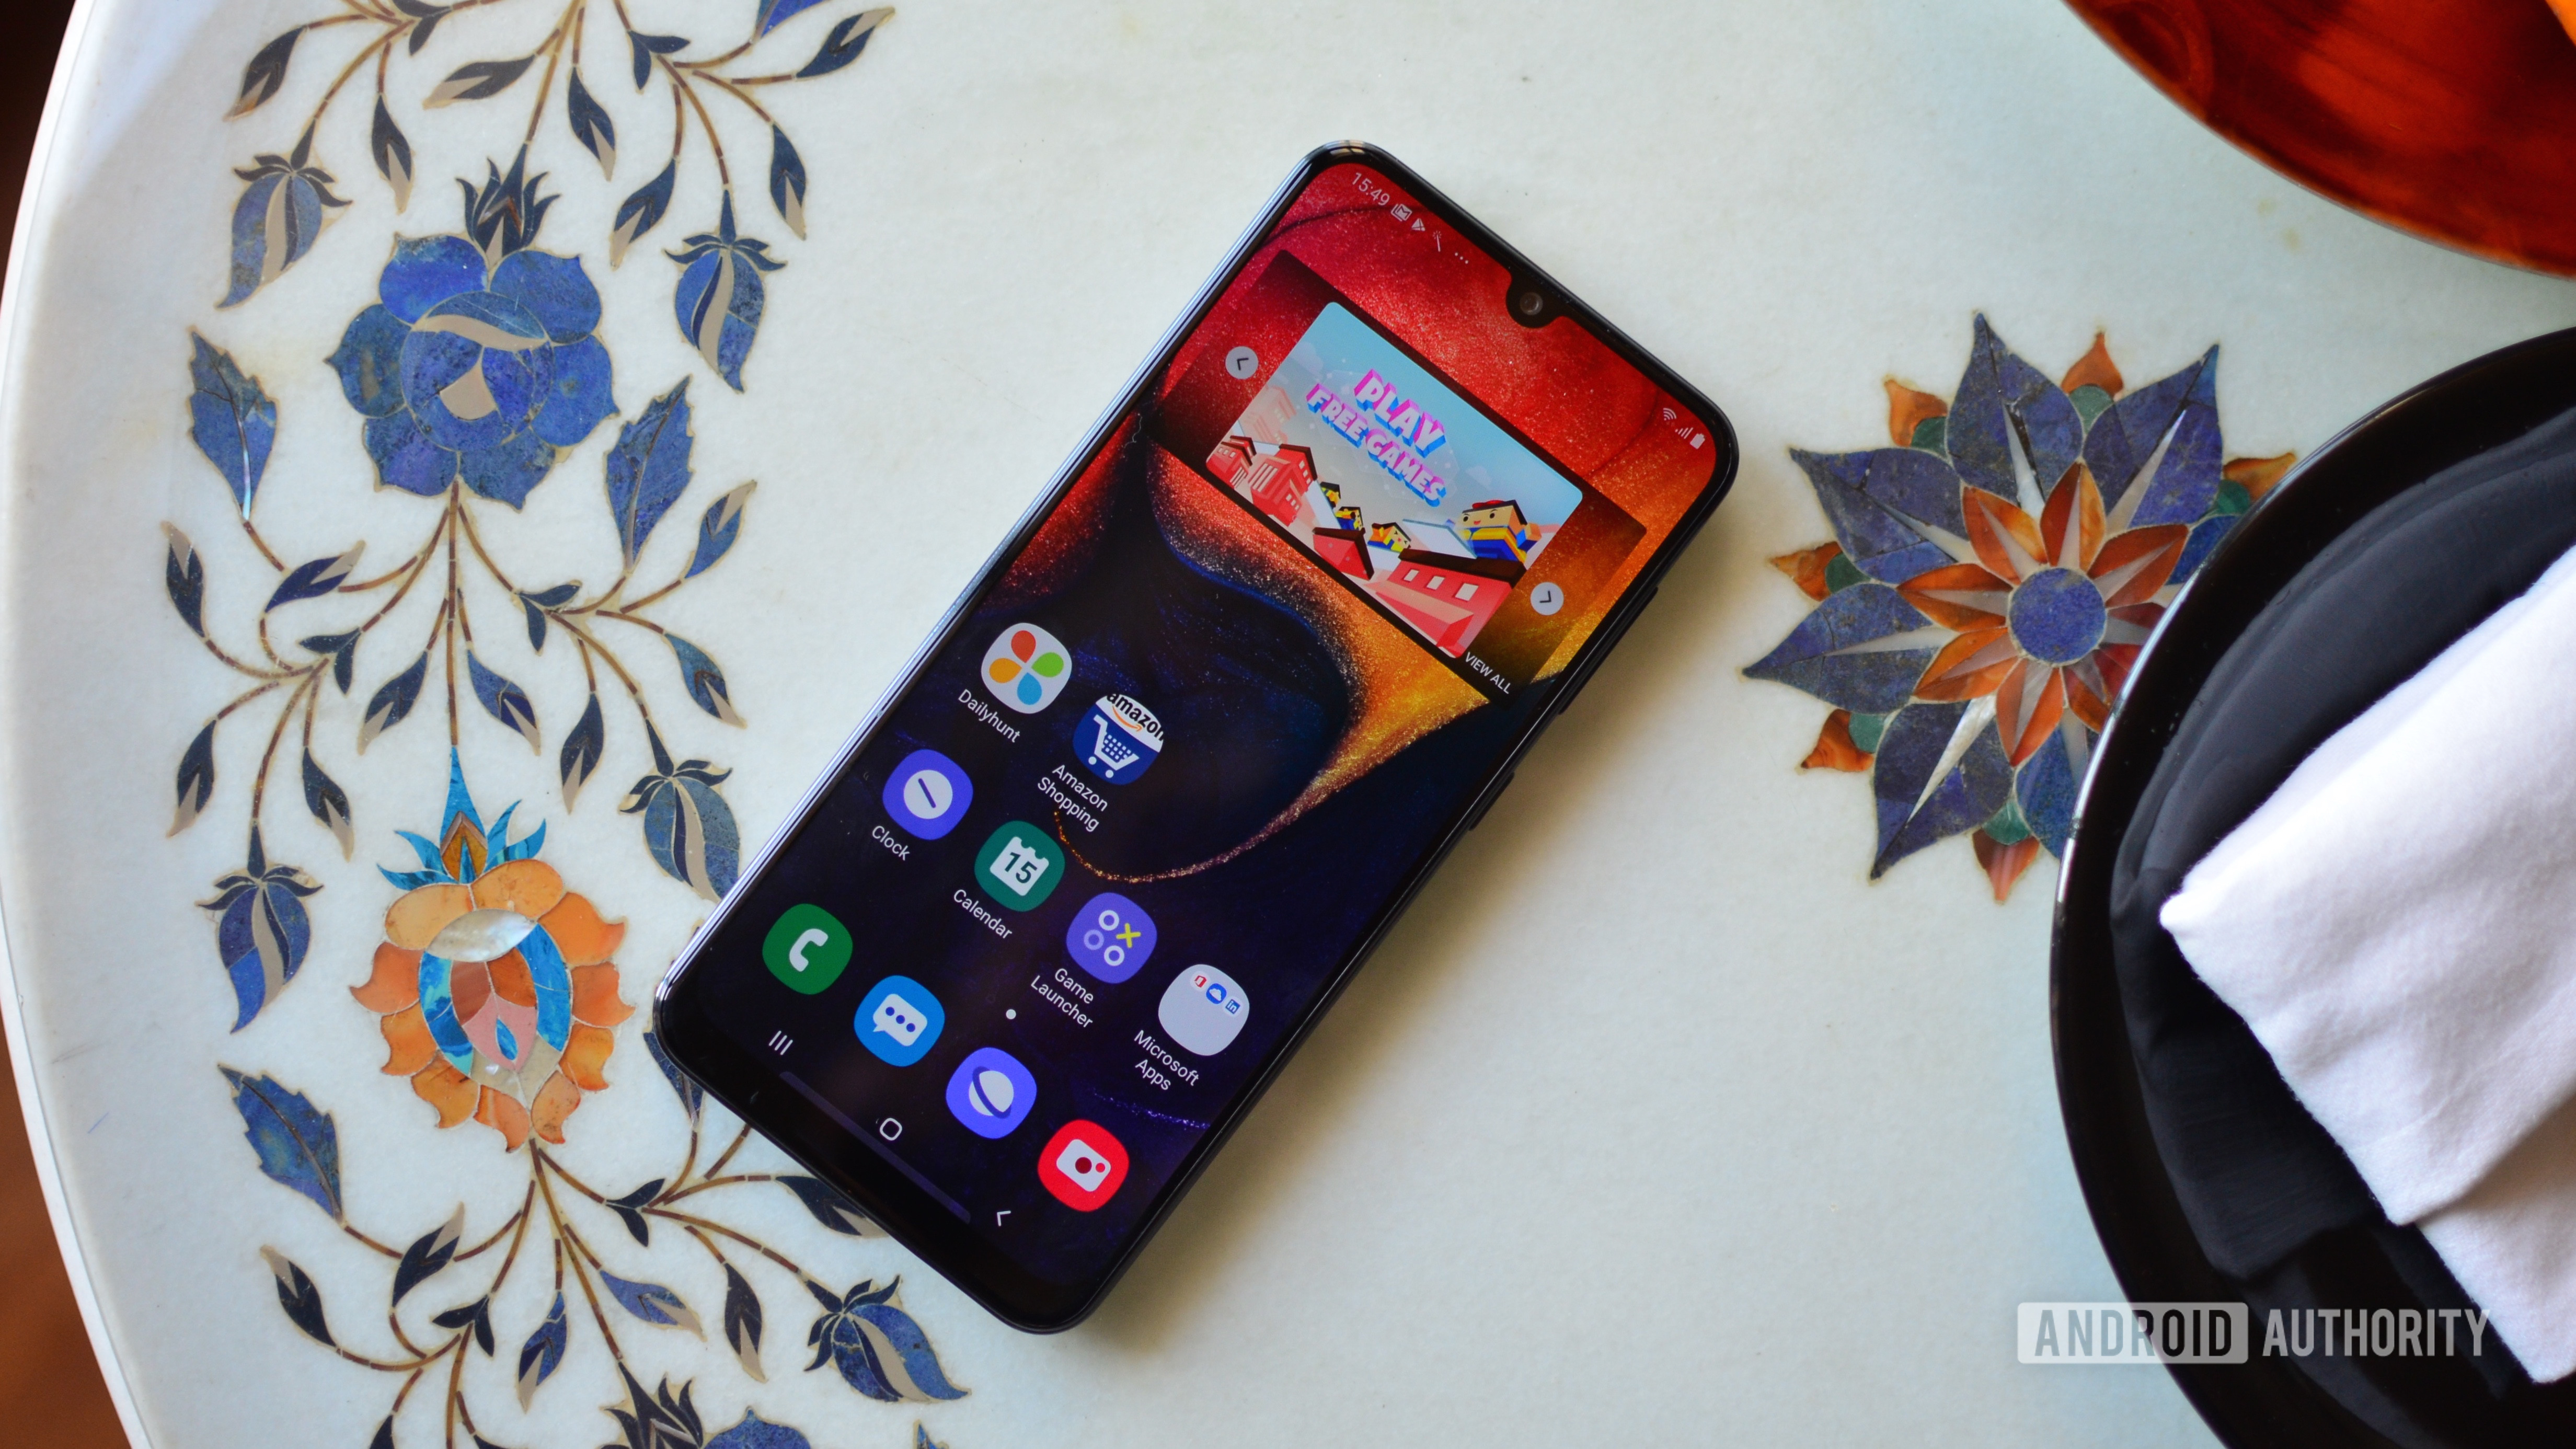 Samsung Galaxy A50 front display. One of the best budget phones.